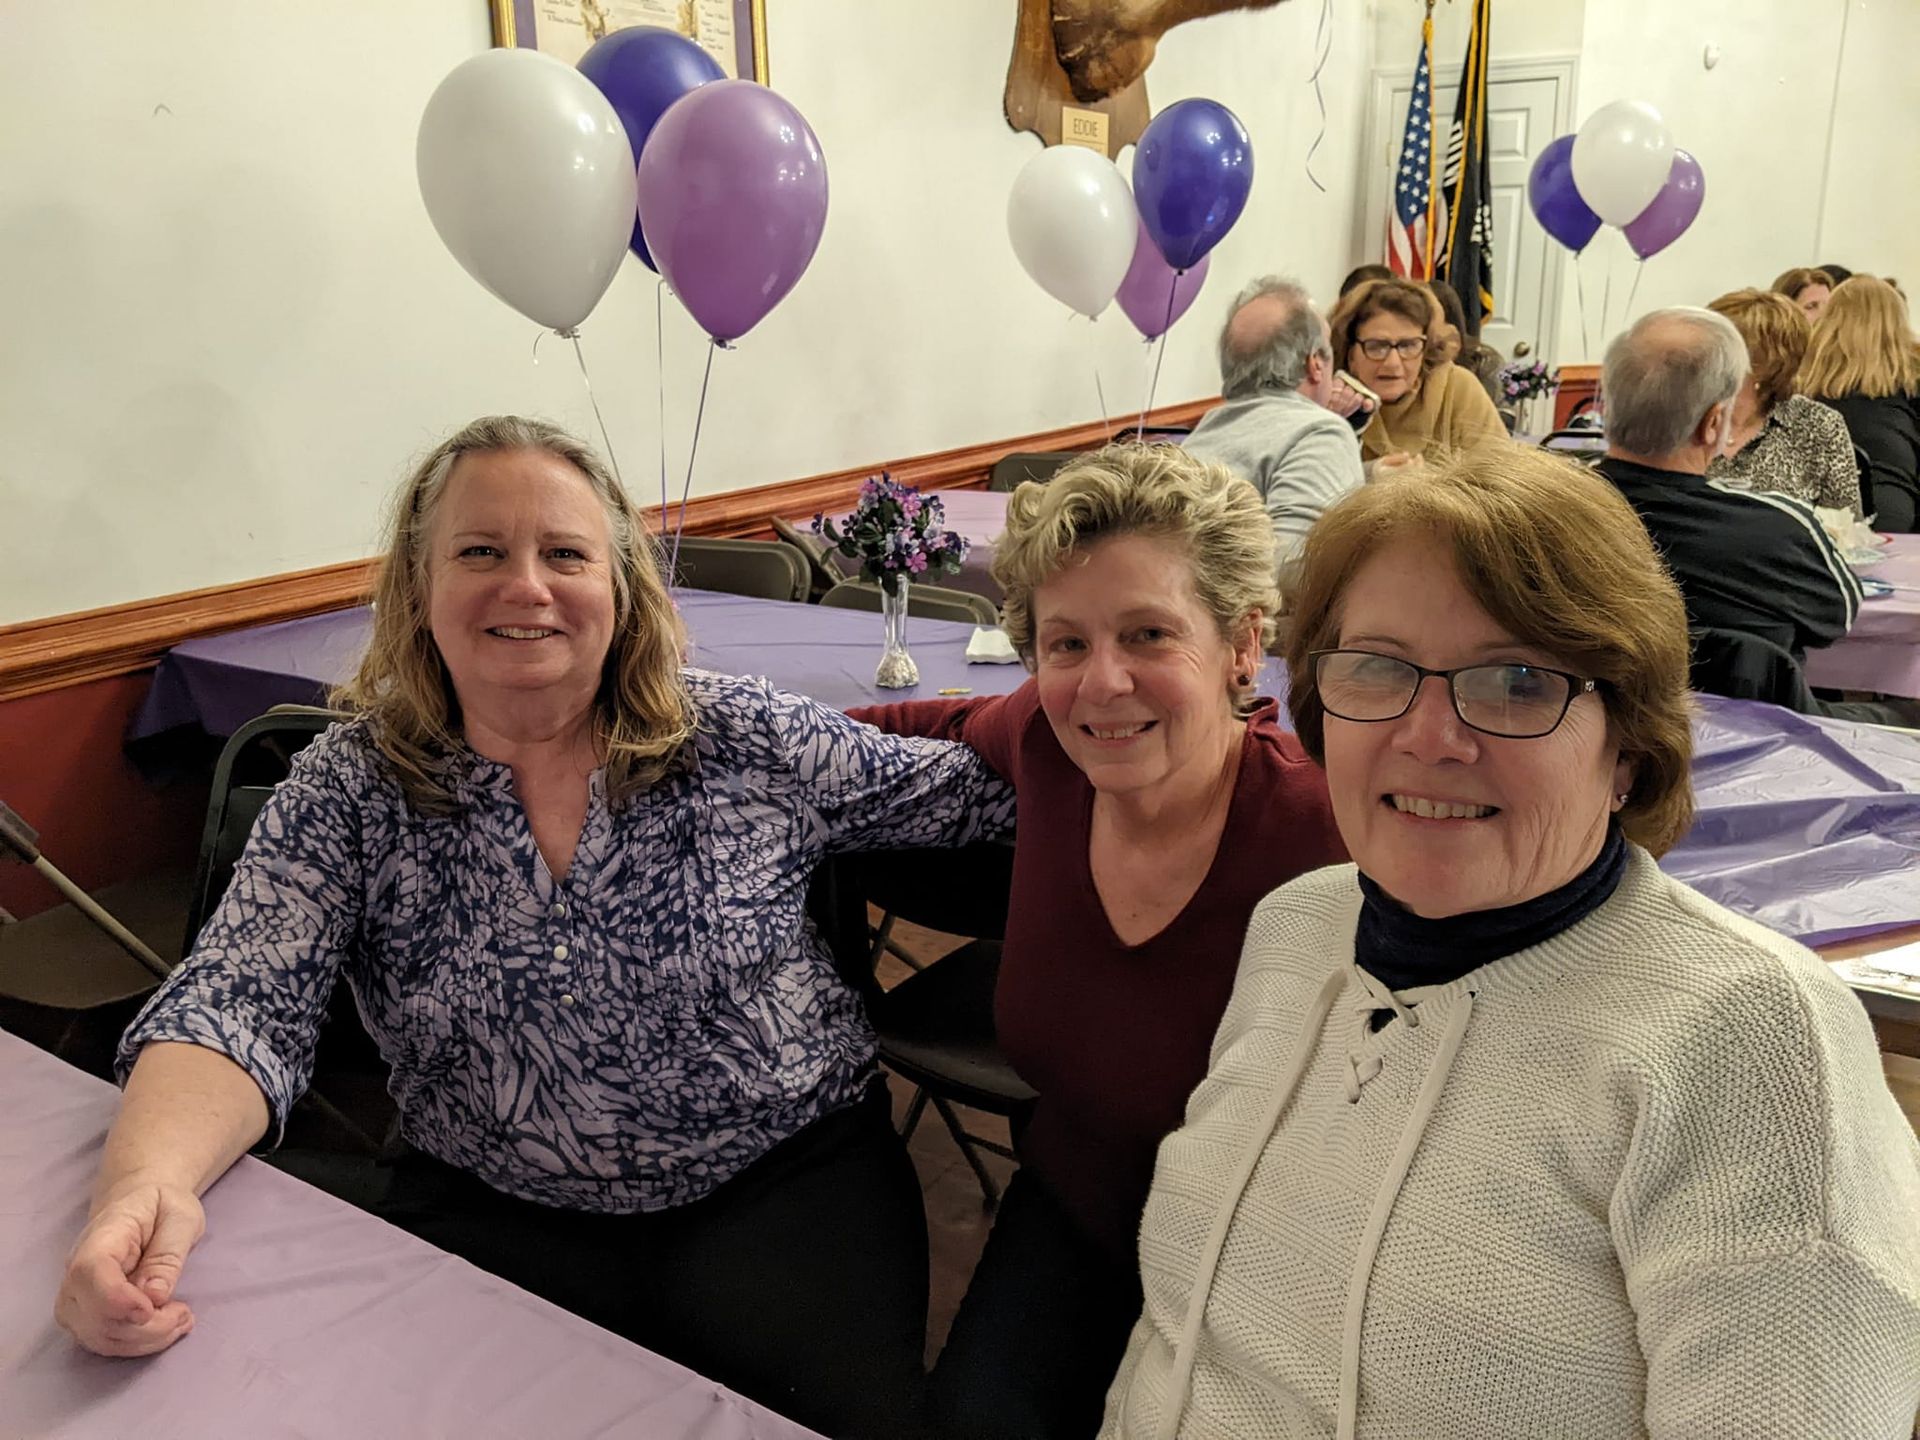 three women are posing for a picture in a room with purple and white balloons